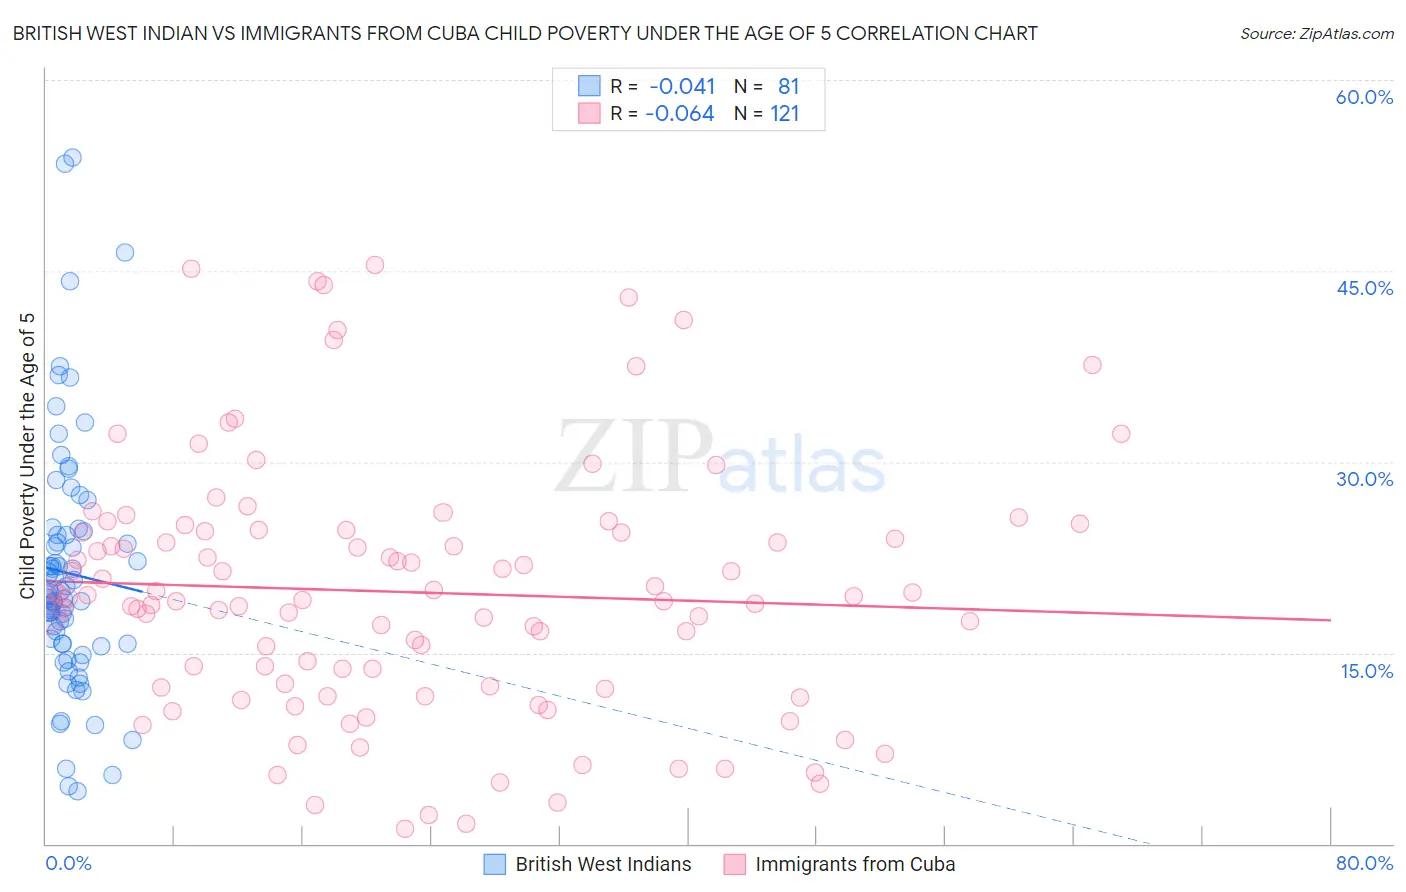 British West Indian vs Immigrants from Cuba Child Poverty Under the Age of 5